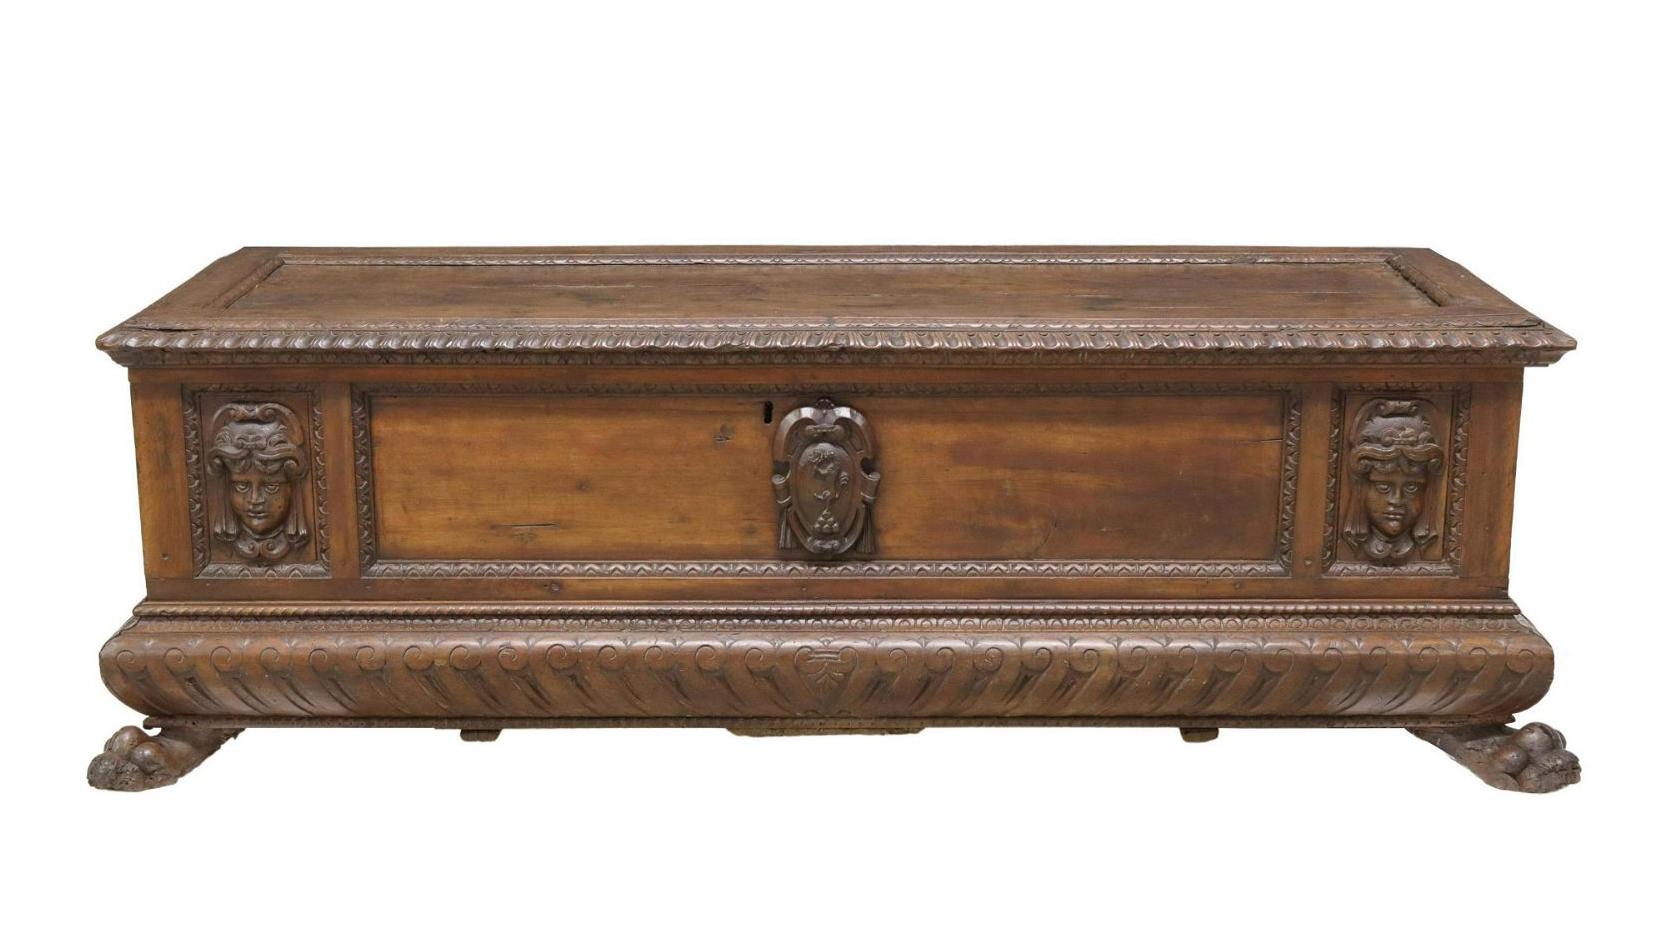 Large Antique Italian Renaissance style walnut cassone/ storage coffer, 18th c. This chest features a rectangular coffered top, with running ornamentation border, opening to storage interior, over front carved with central cartouche and figural